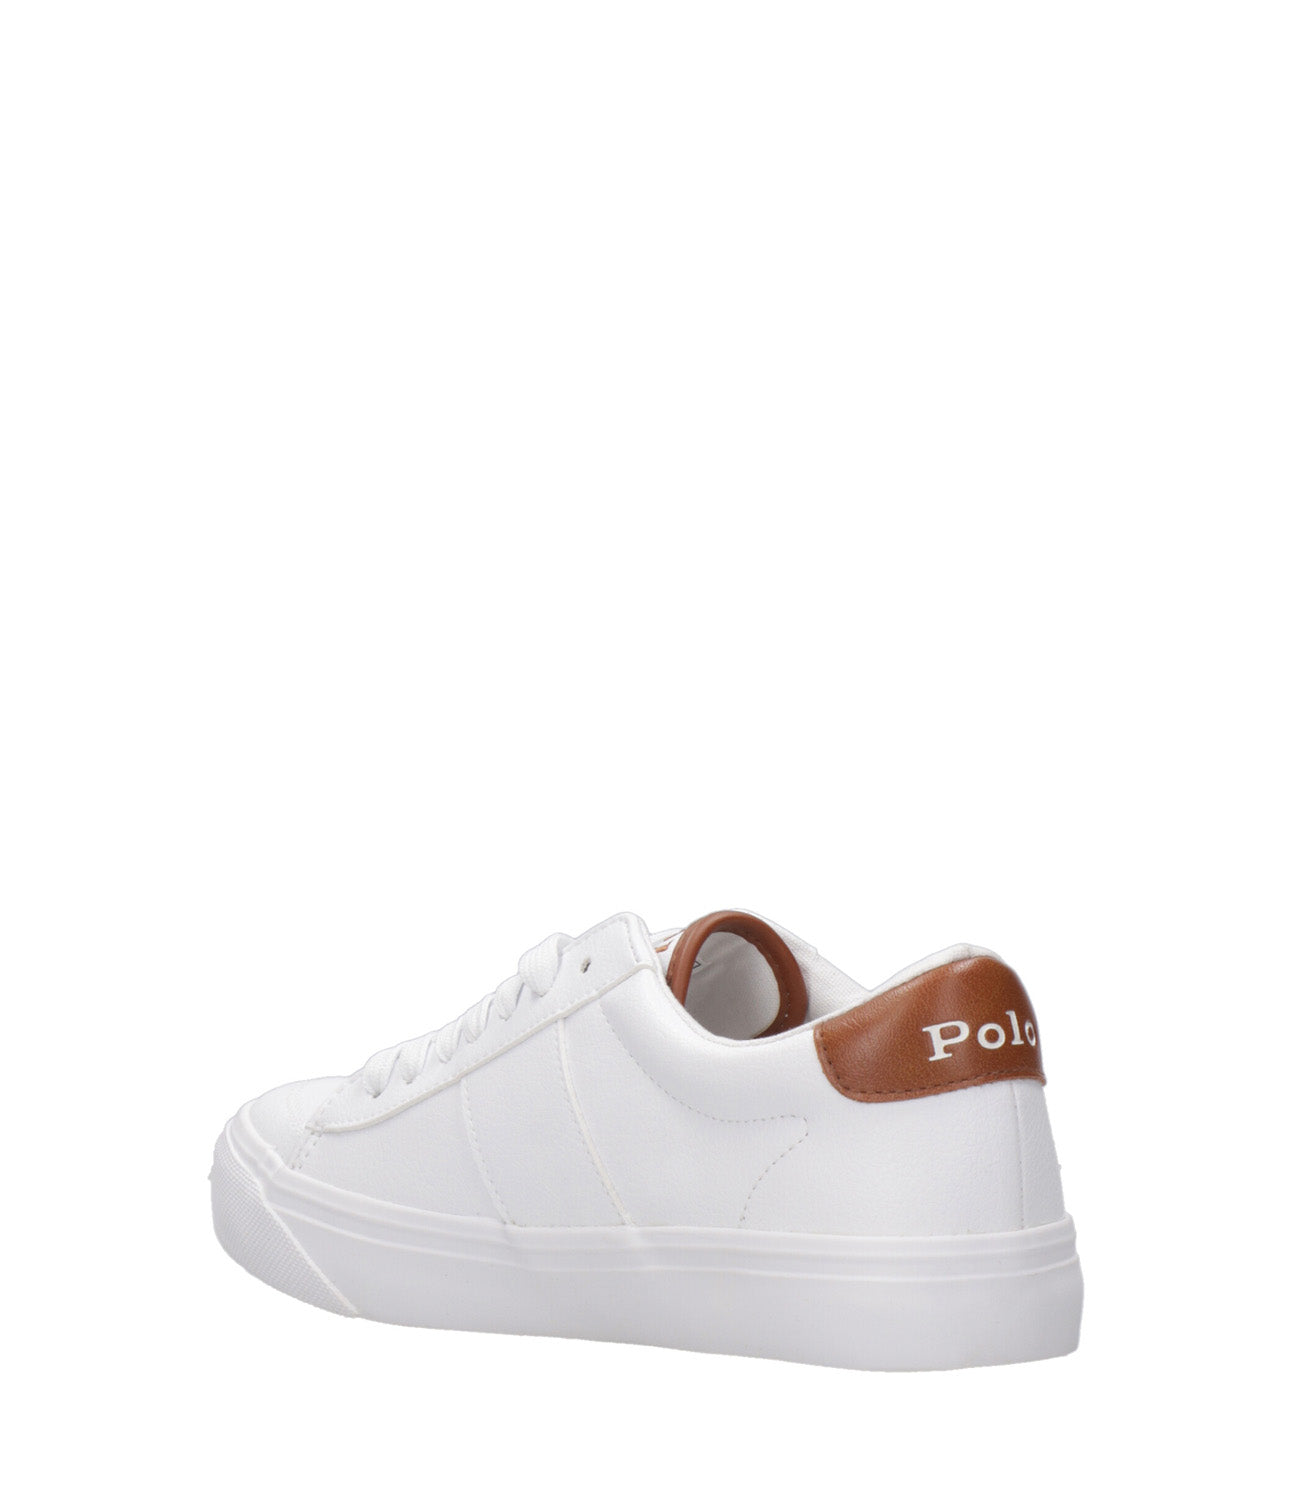 Ralph Lauren Childrenswear | White and Brown Sneakers